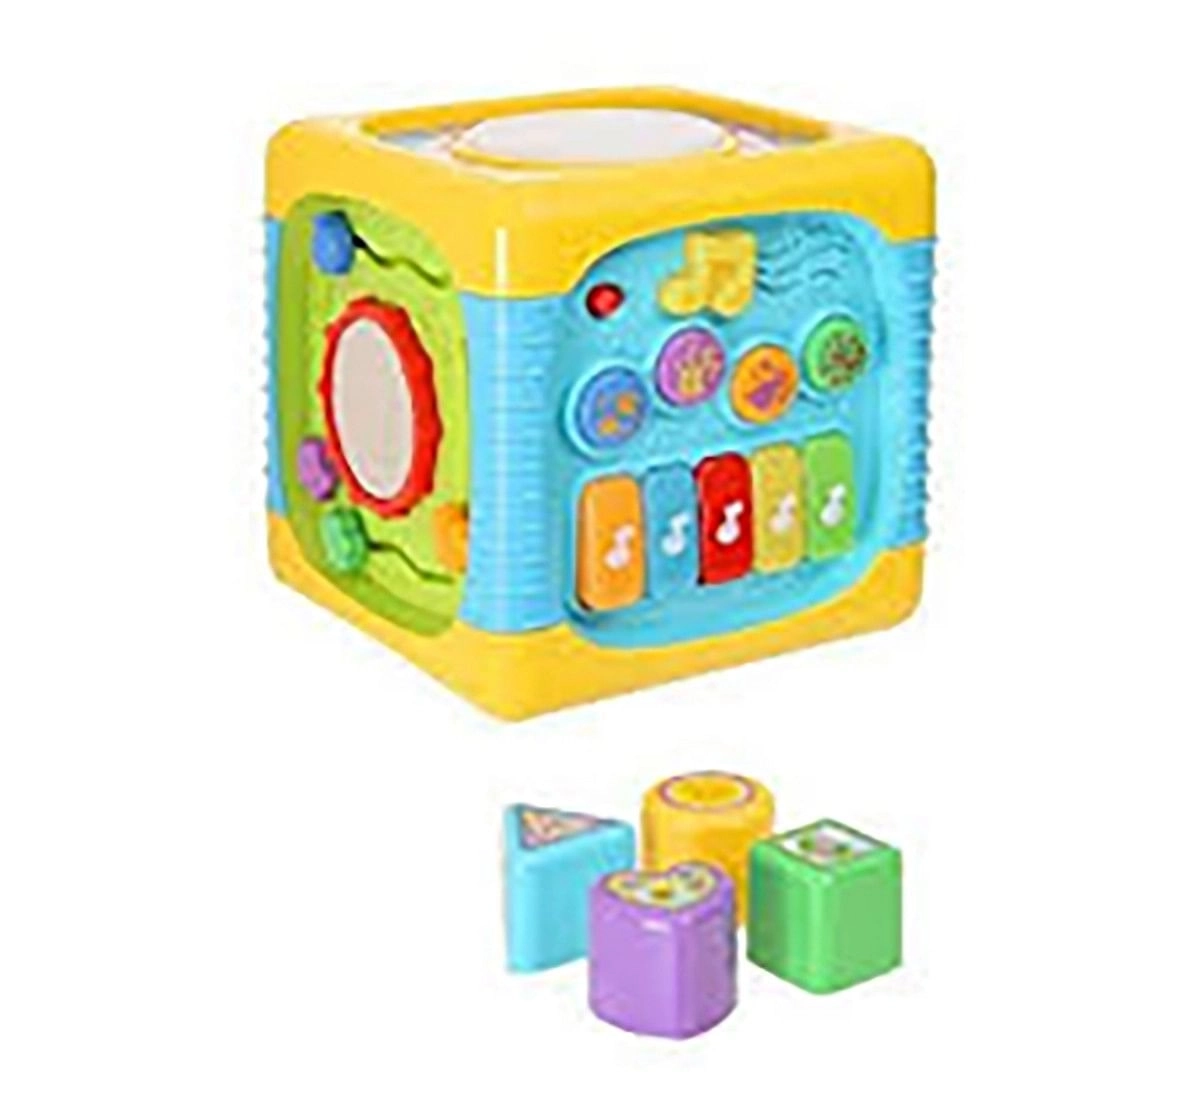 Winfun - Music Fun Activity Cube Learning Toys for Kids age 8M+ 